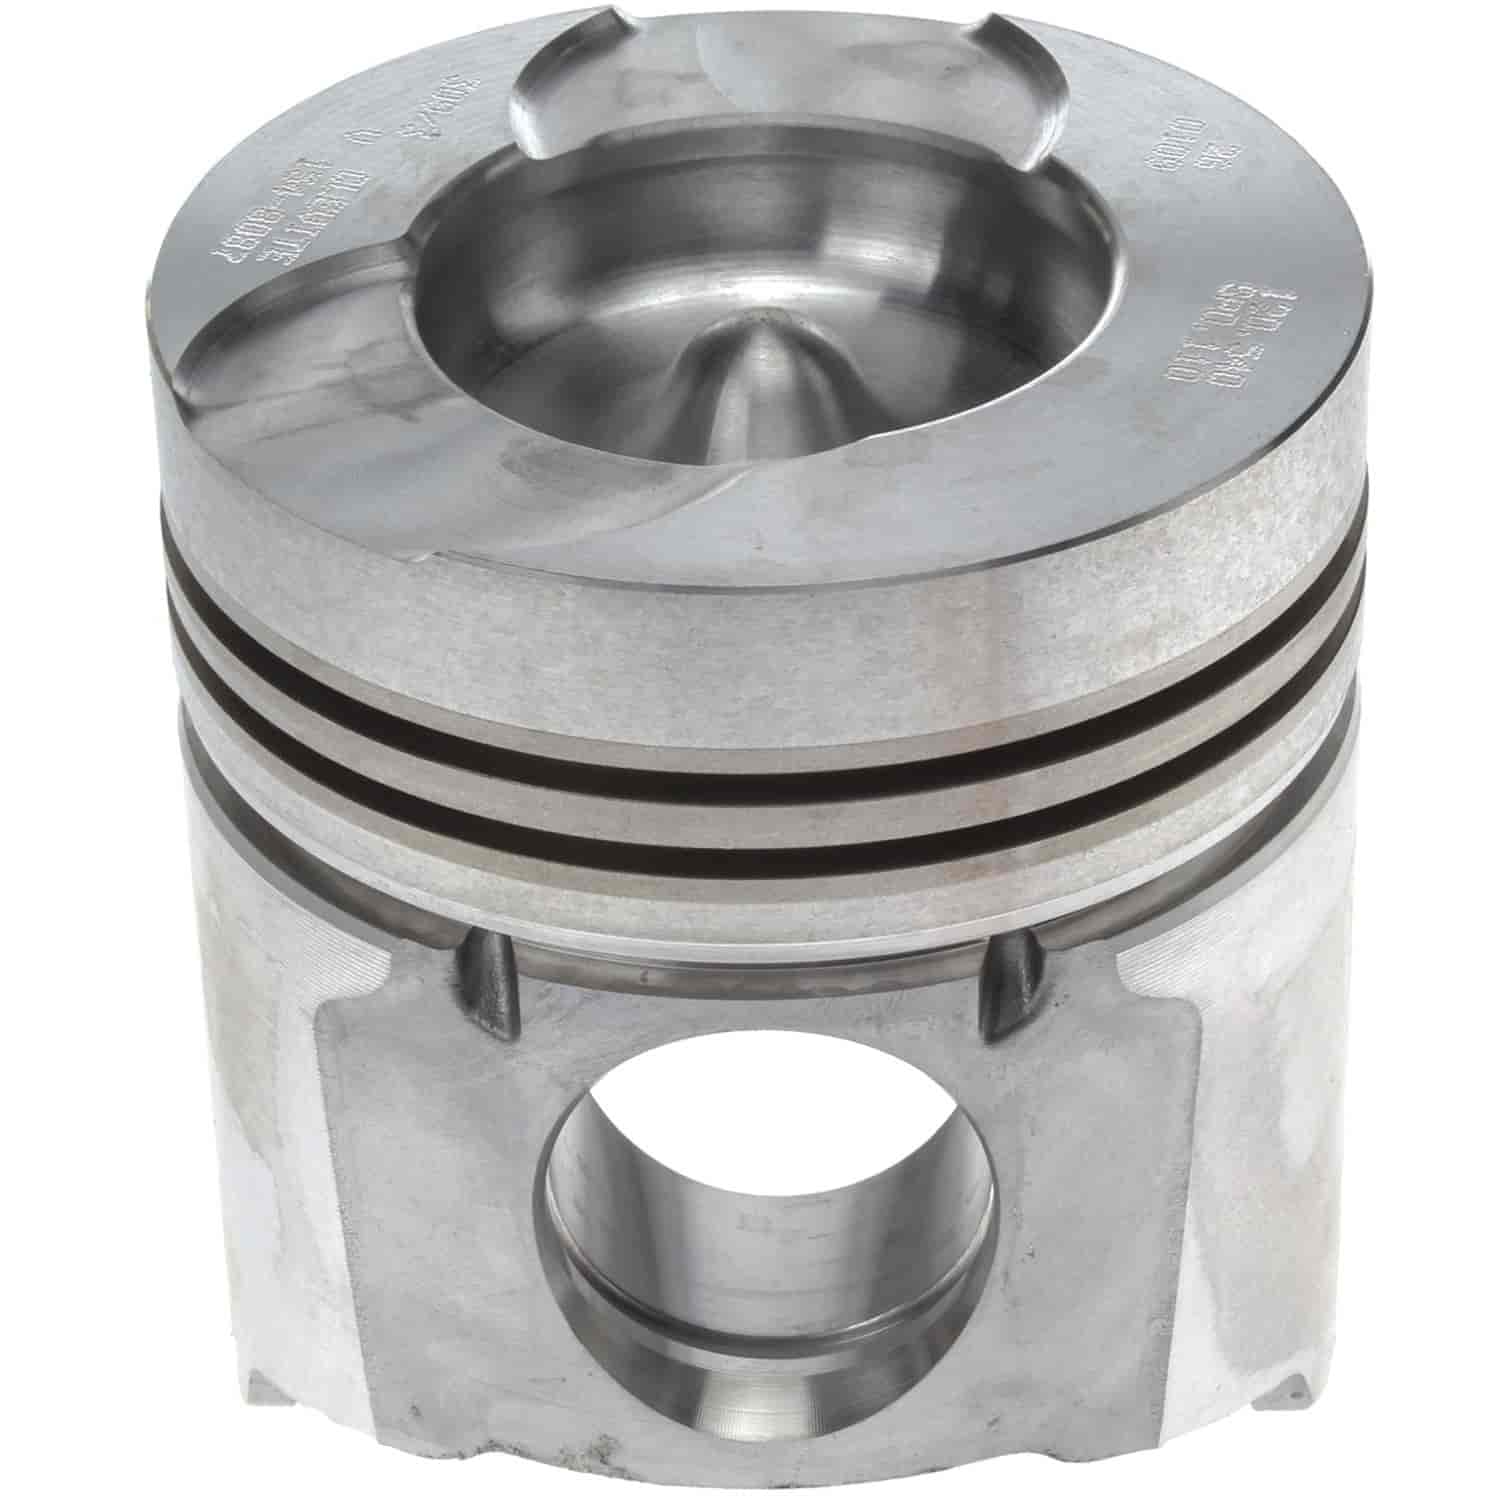 Piston Without Piston Pin Caterpillar 3306C S/N 2AM 6cyl. Diesel Engine